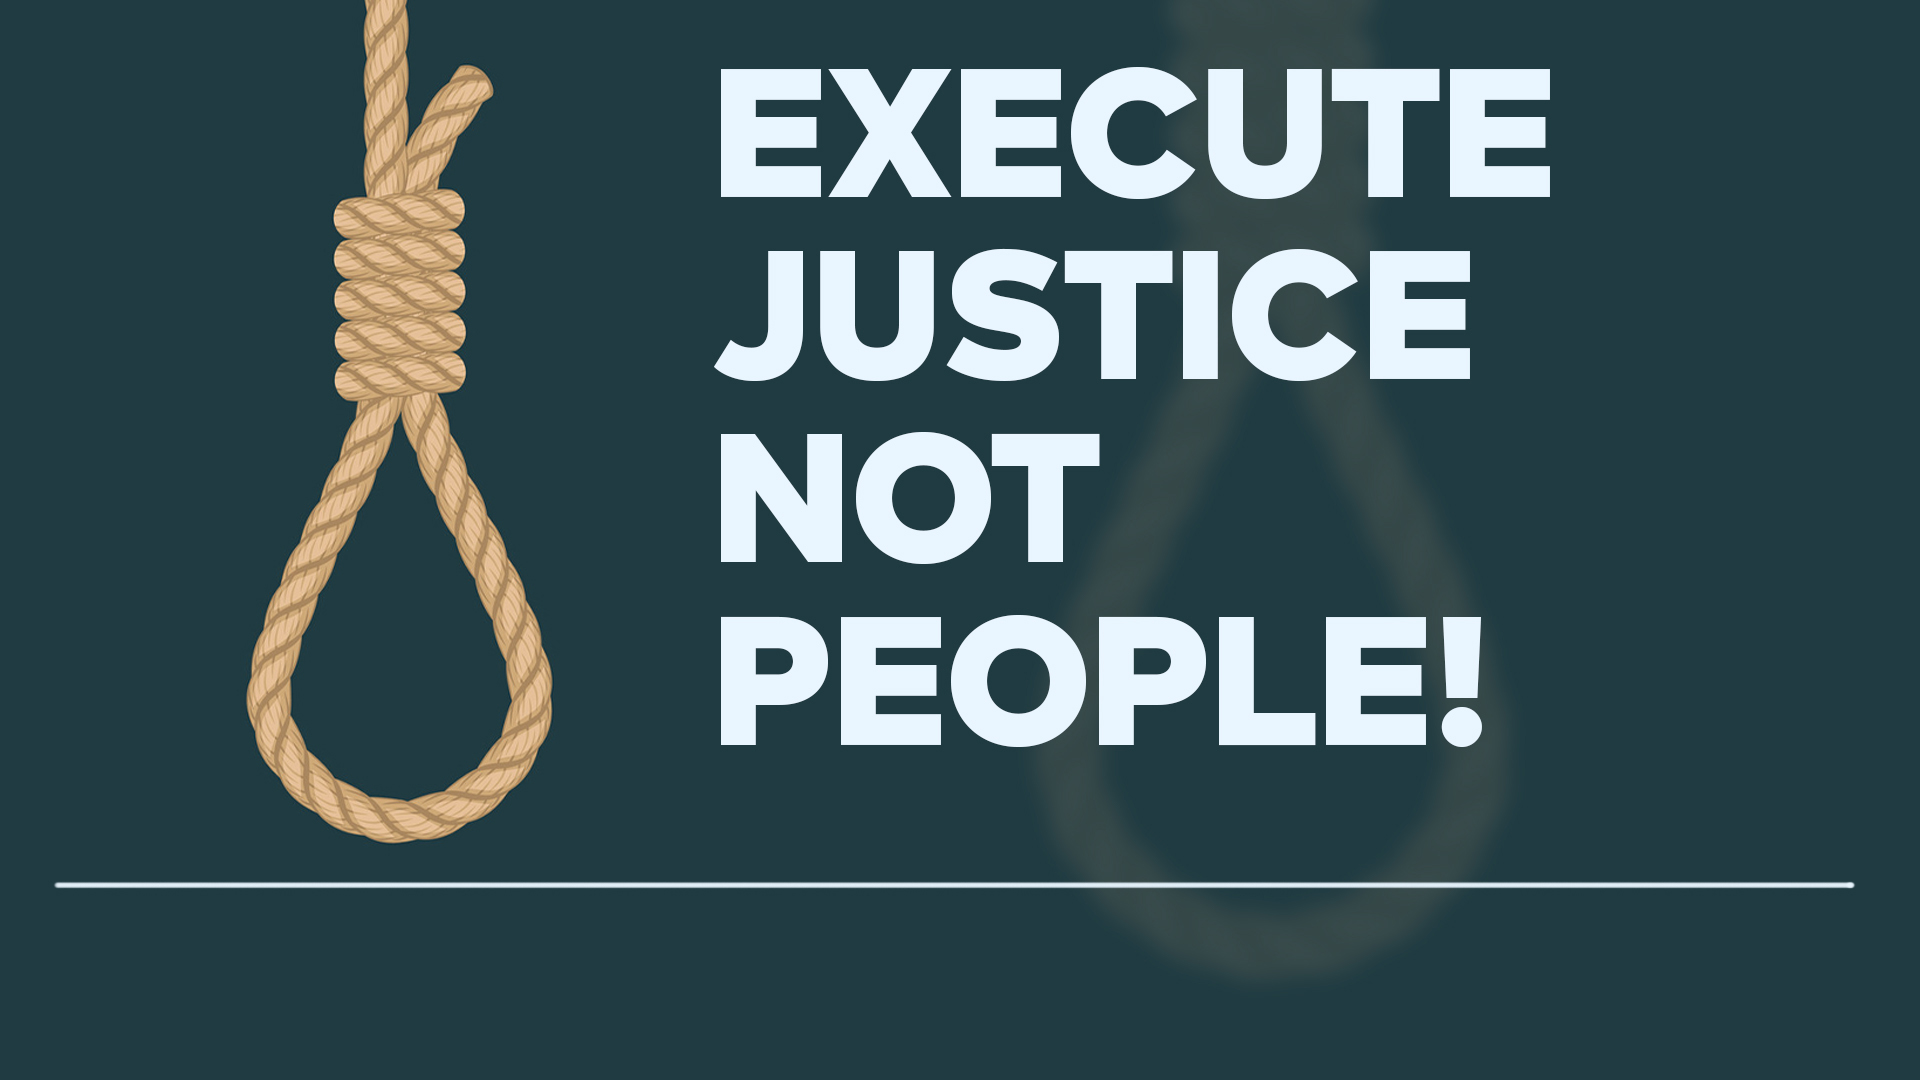 death penalty does not deter crime essay